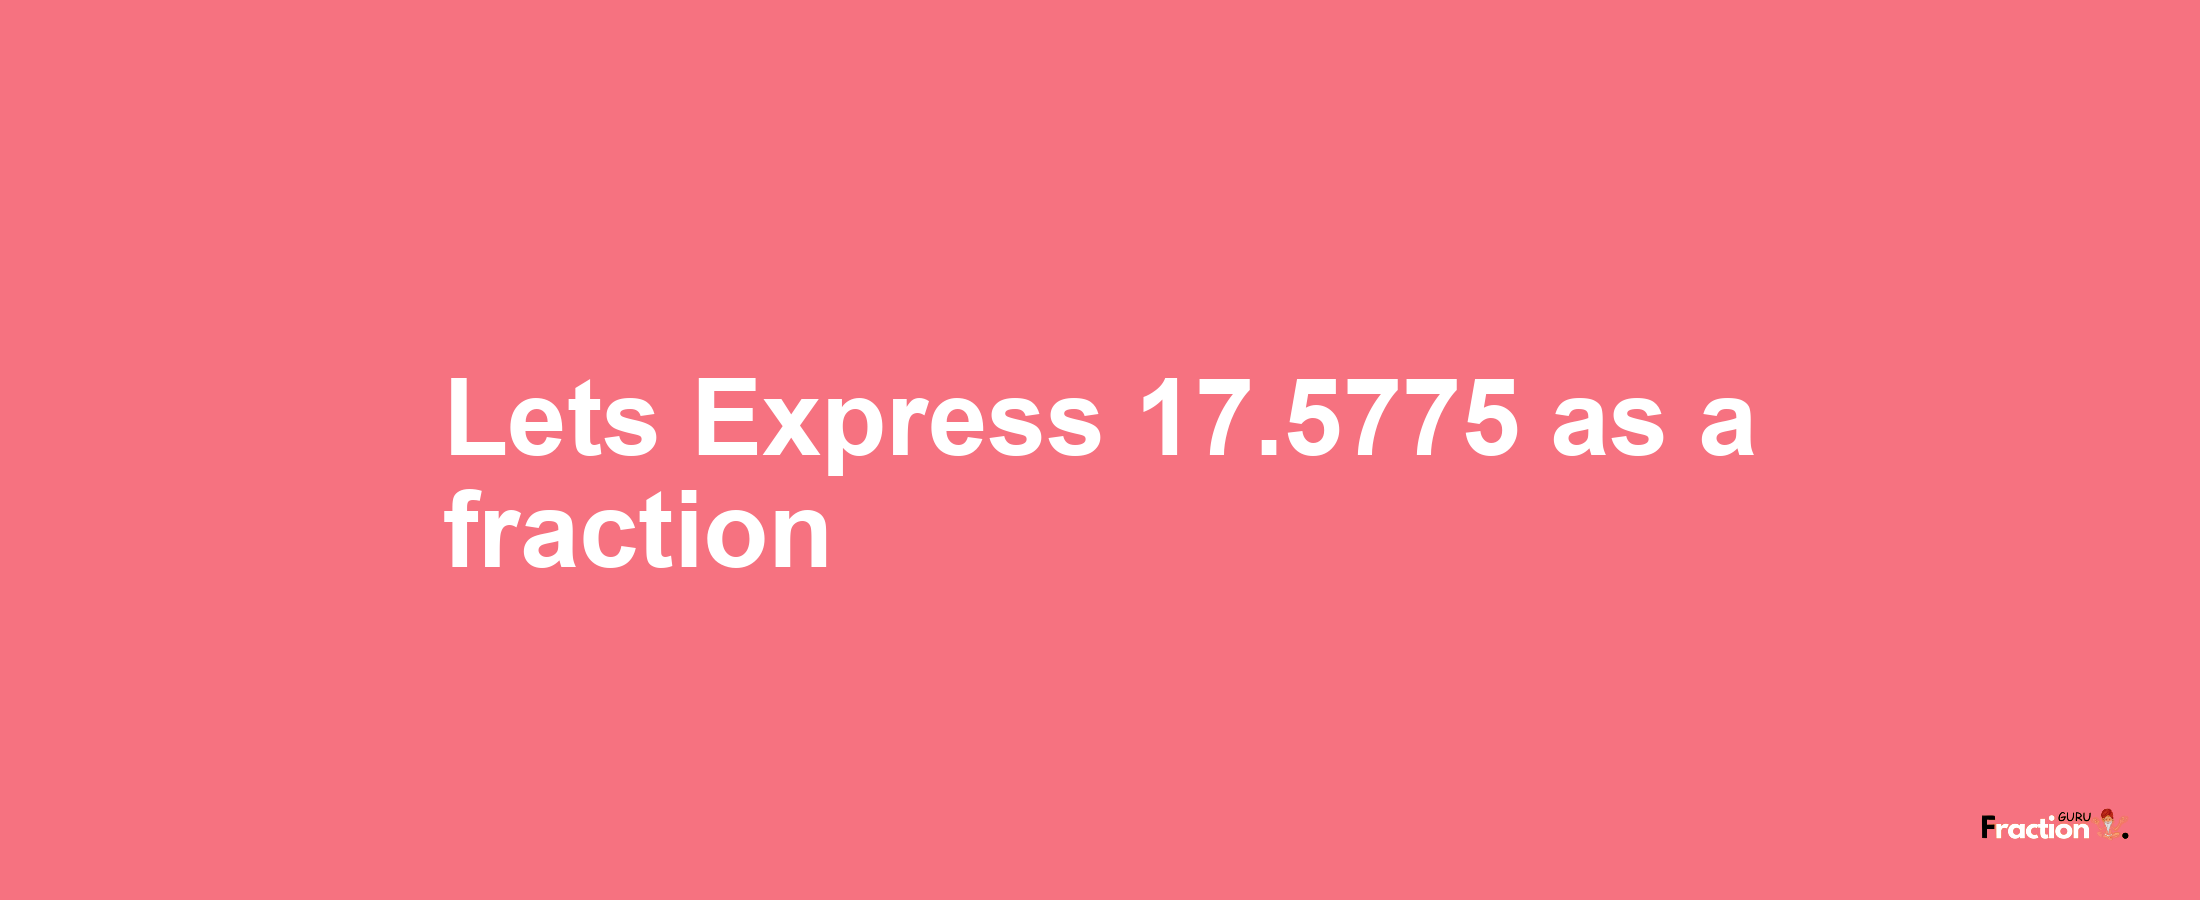 Lets Express 17.5775 as afraction